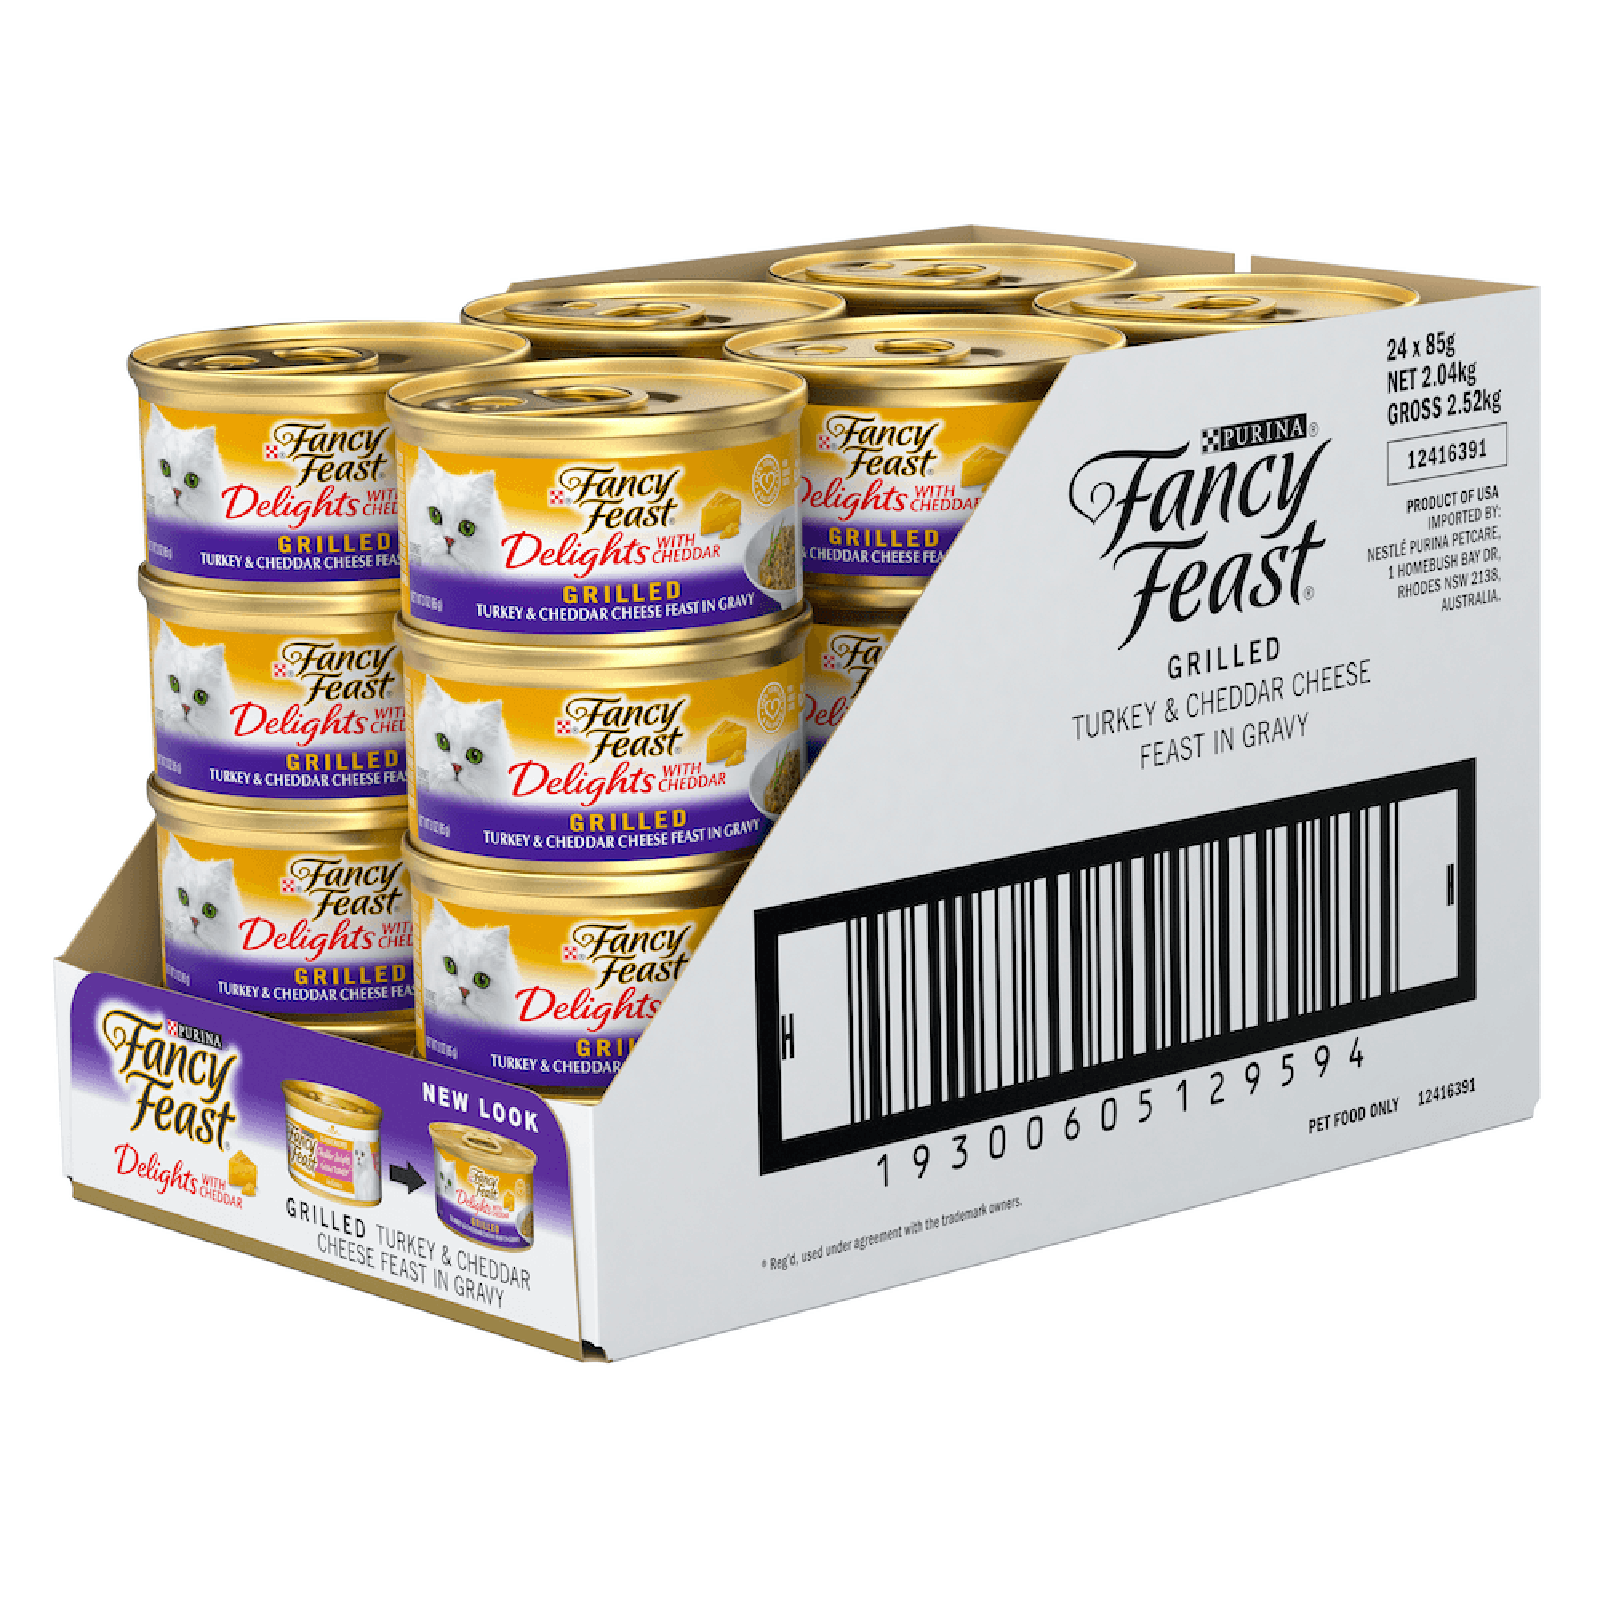 Fancy Feast Cat Food Can Adult Delights with Cheddar Turkey